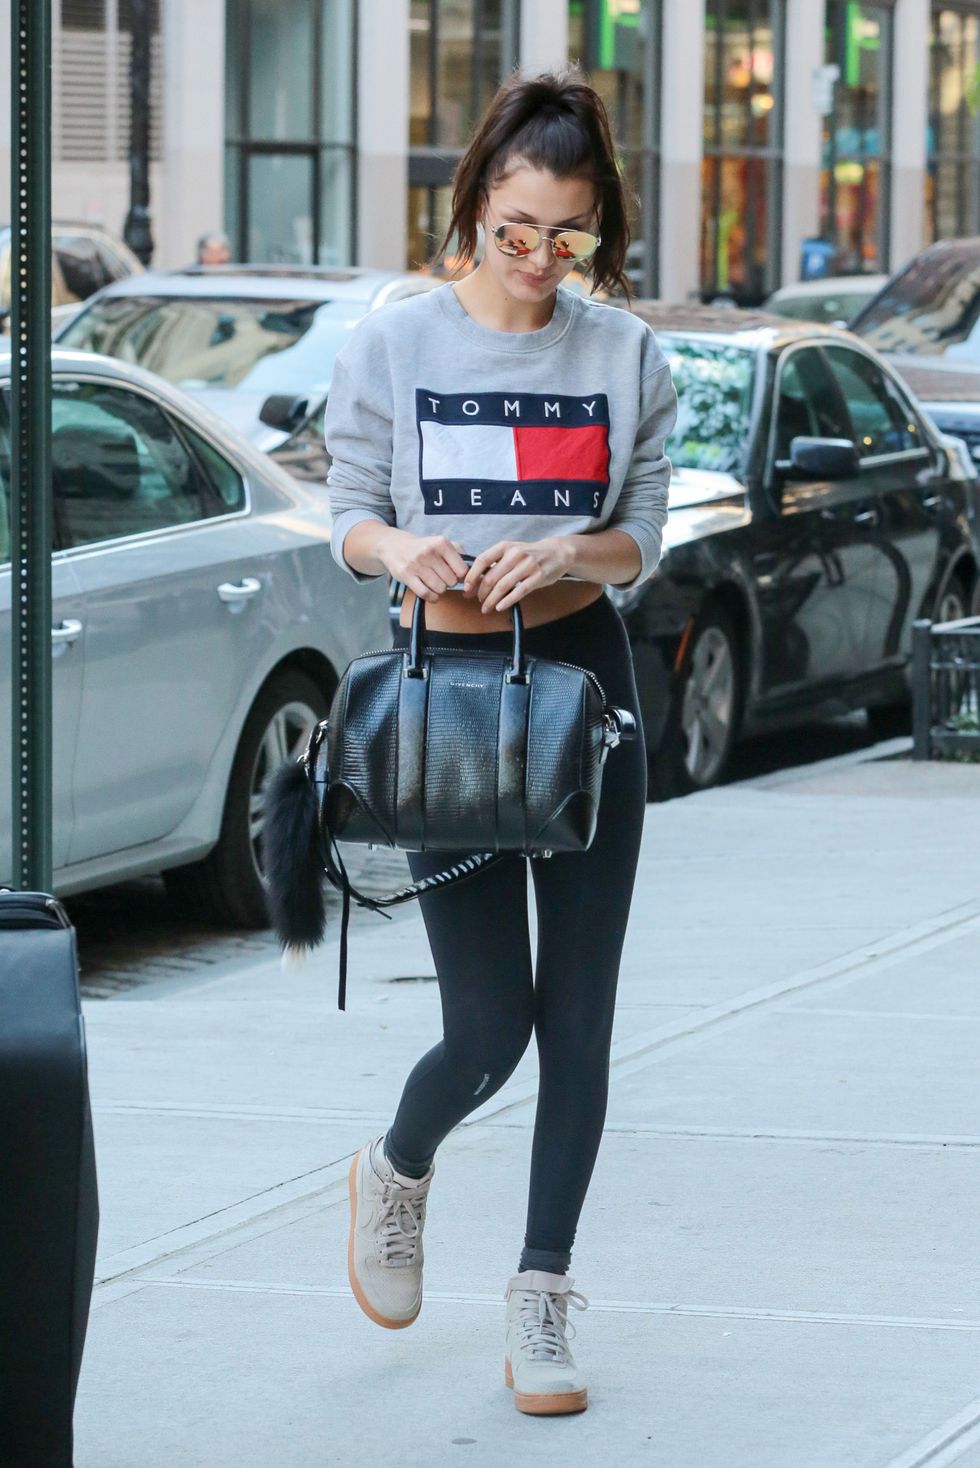 15 Stylish Ways to Wear Leggings This Fall - Cute Leggings Outfit